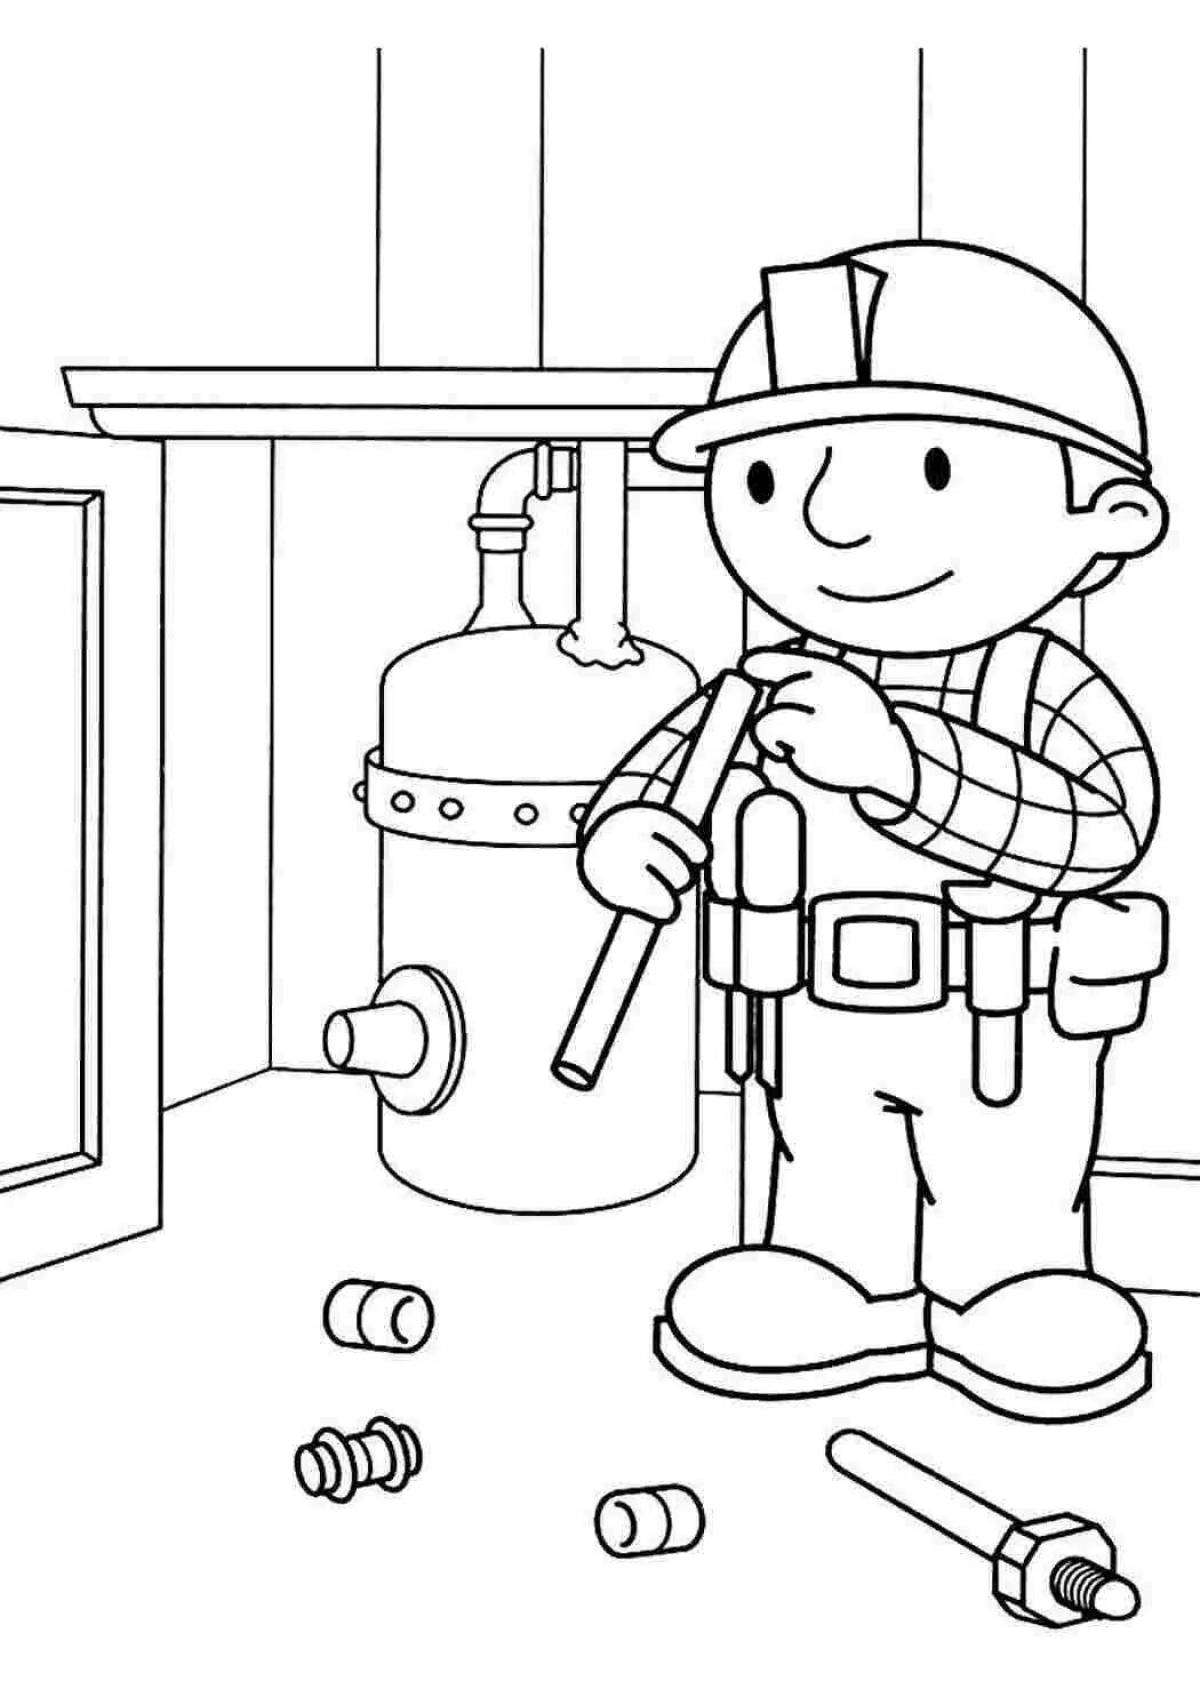 Coloring book cheerful builder for kids